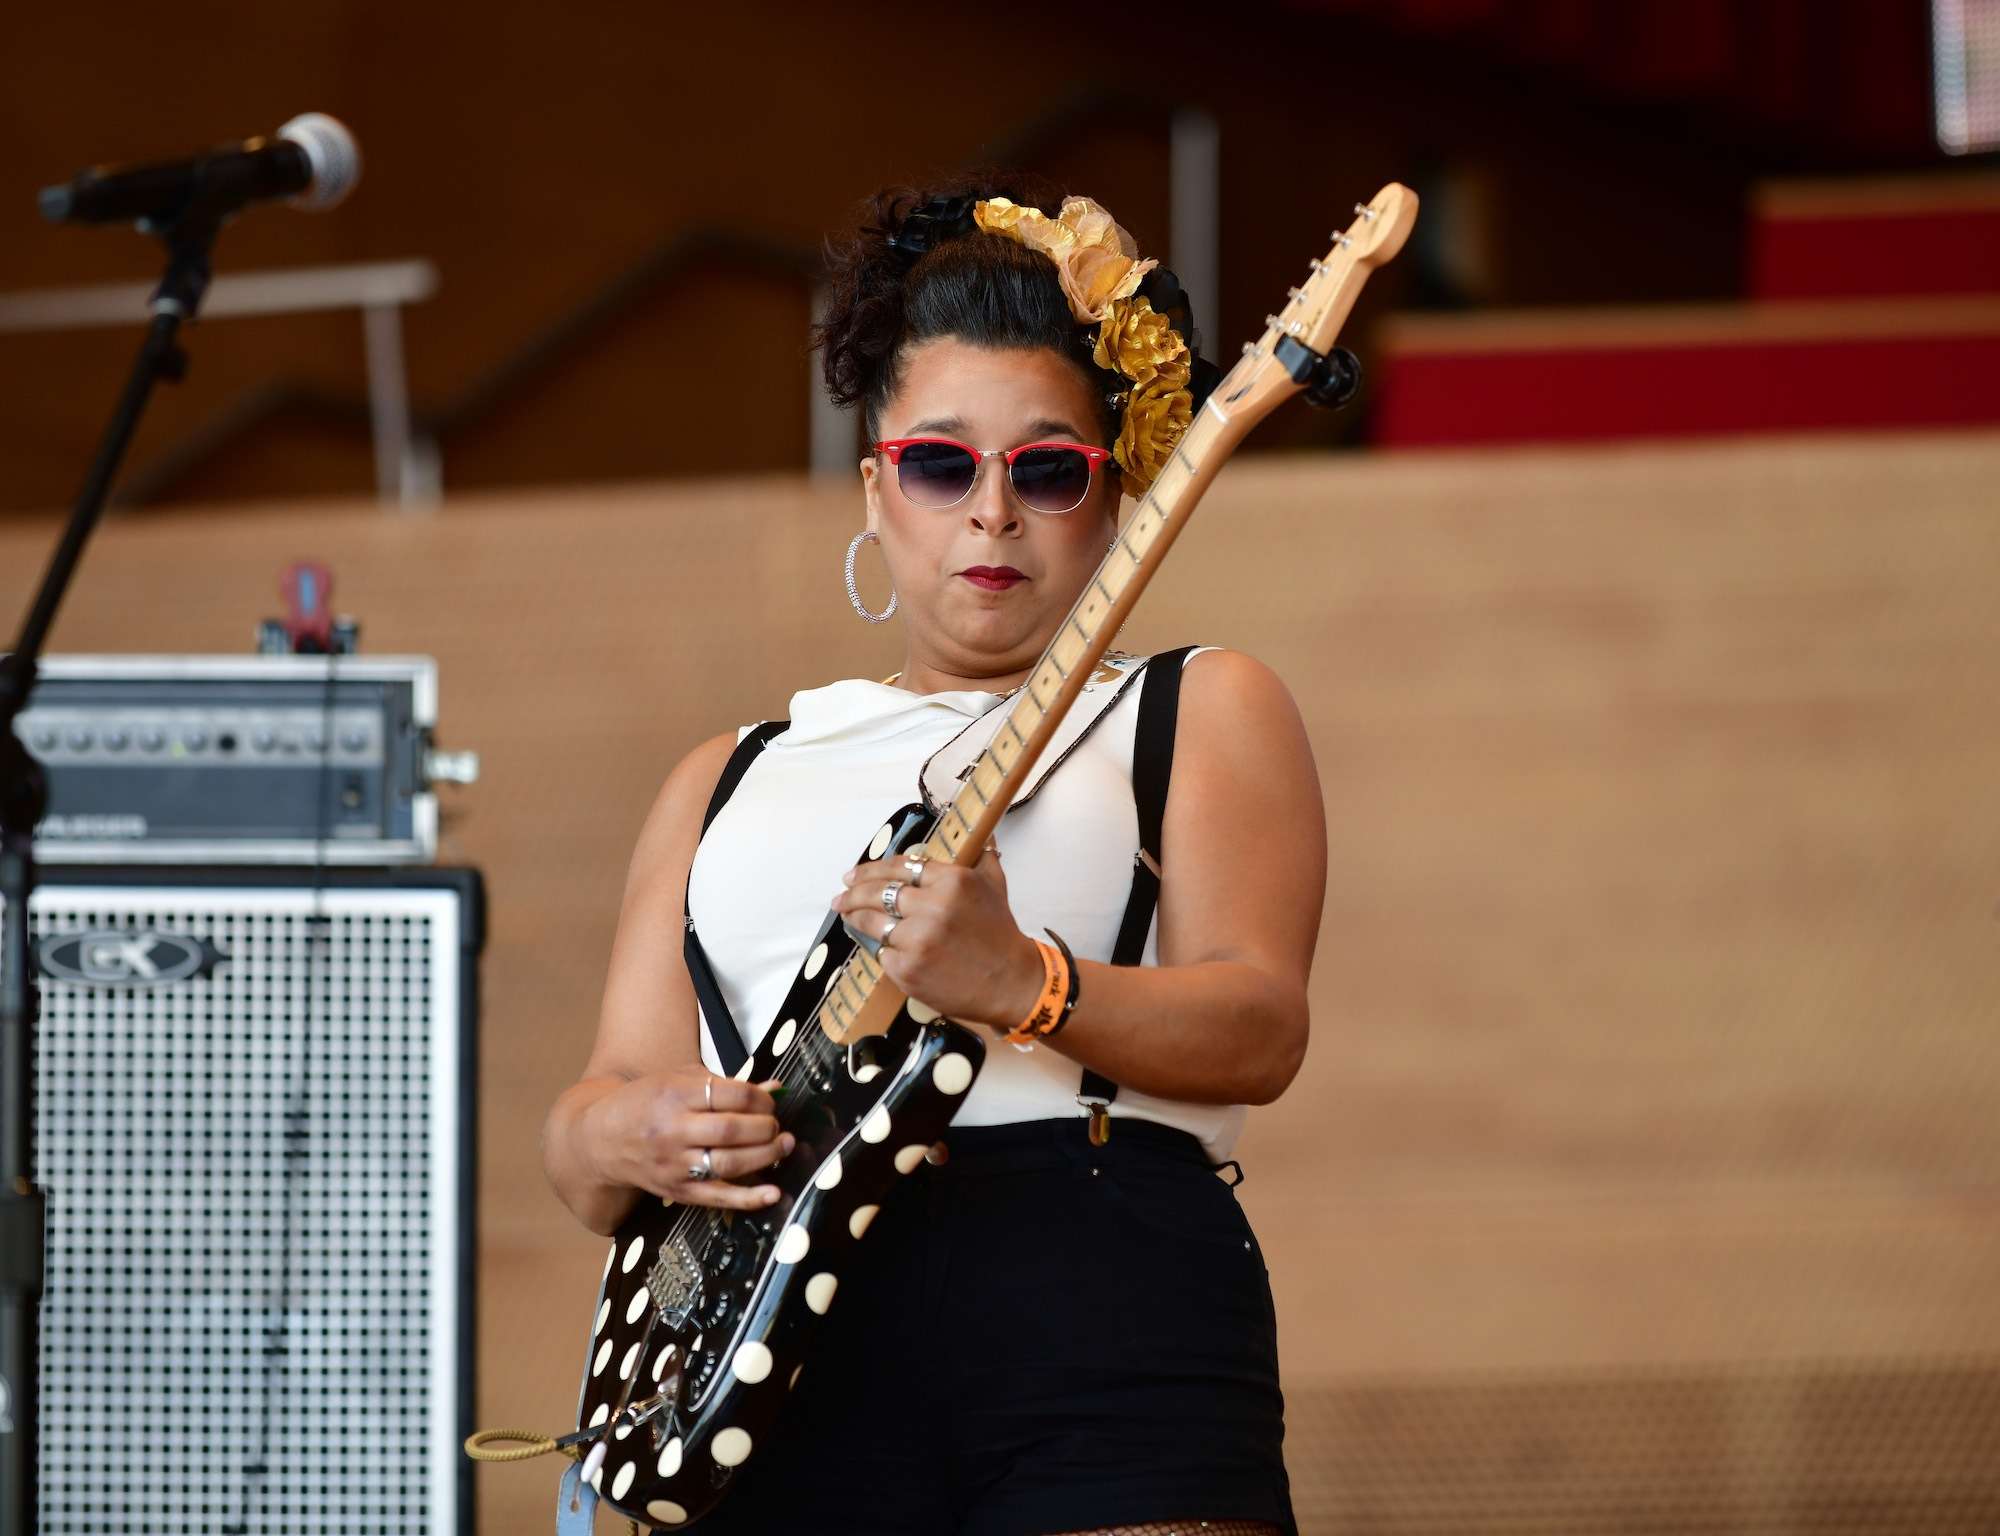 Women In Blues Live At Chicago Blues Fest [GALLERY] 5